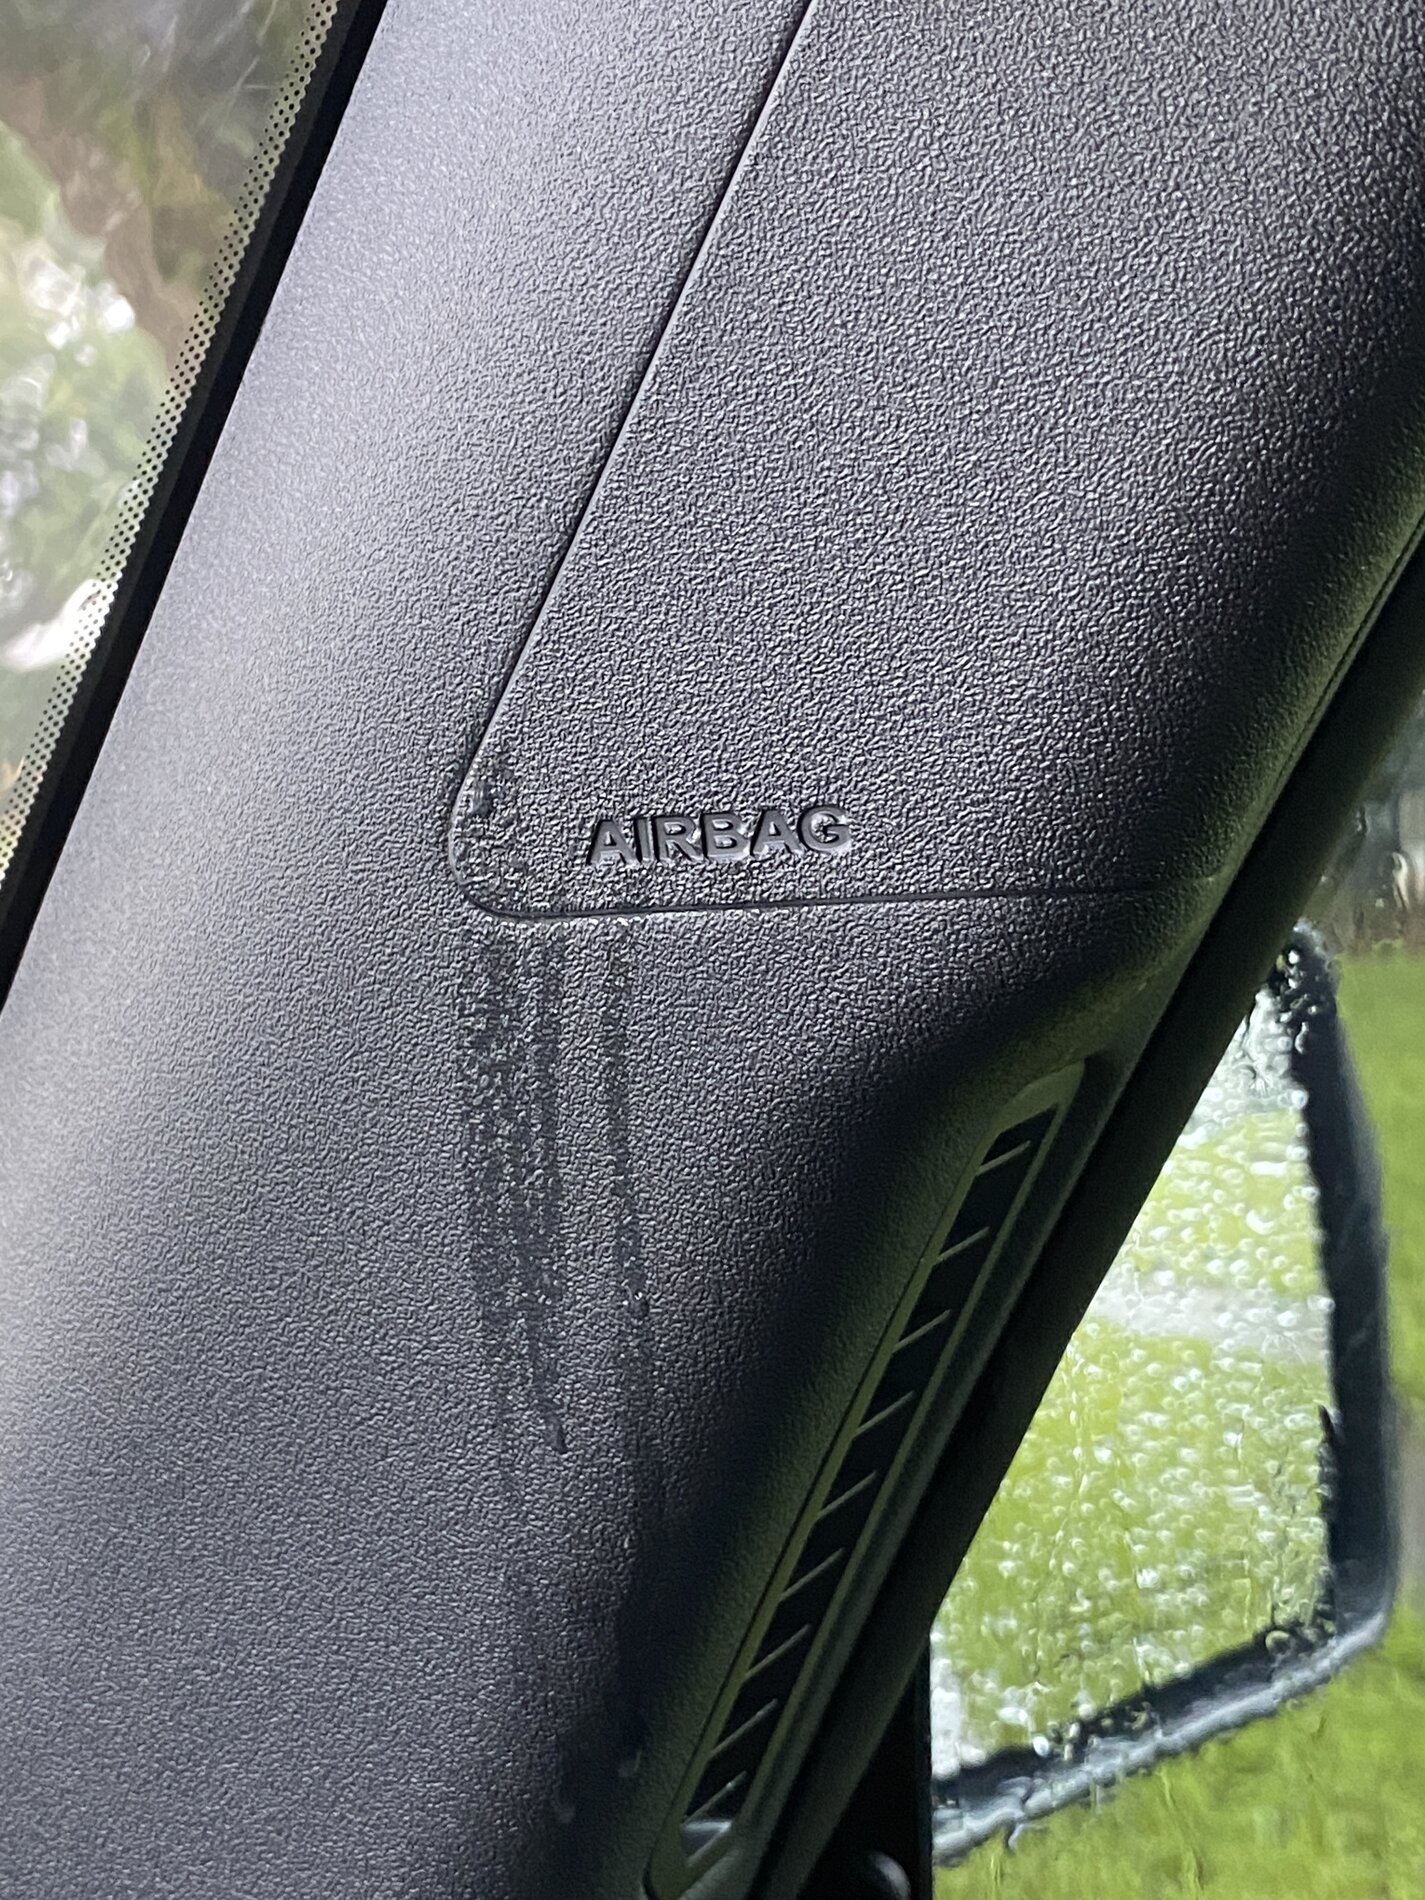 Ford Bronco Water leaking from A-pillar airbag cover in heavy rain 20190527_085908